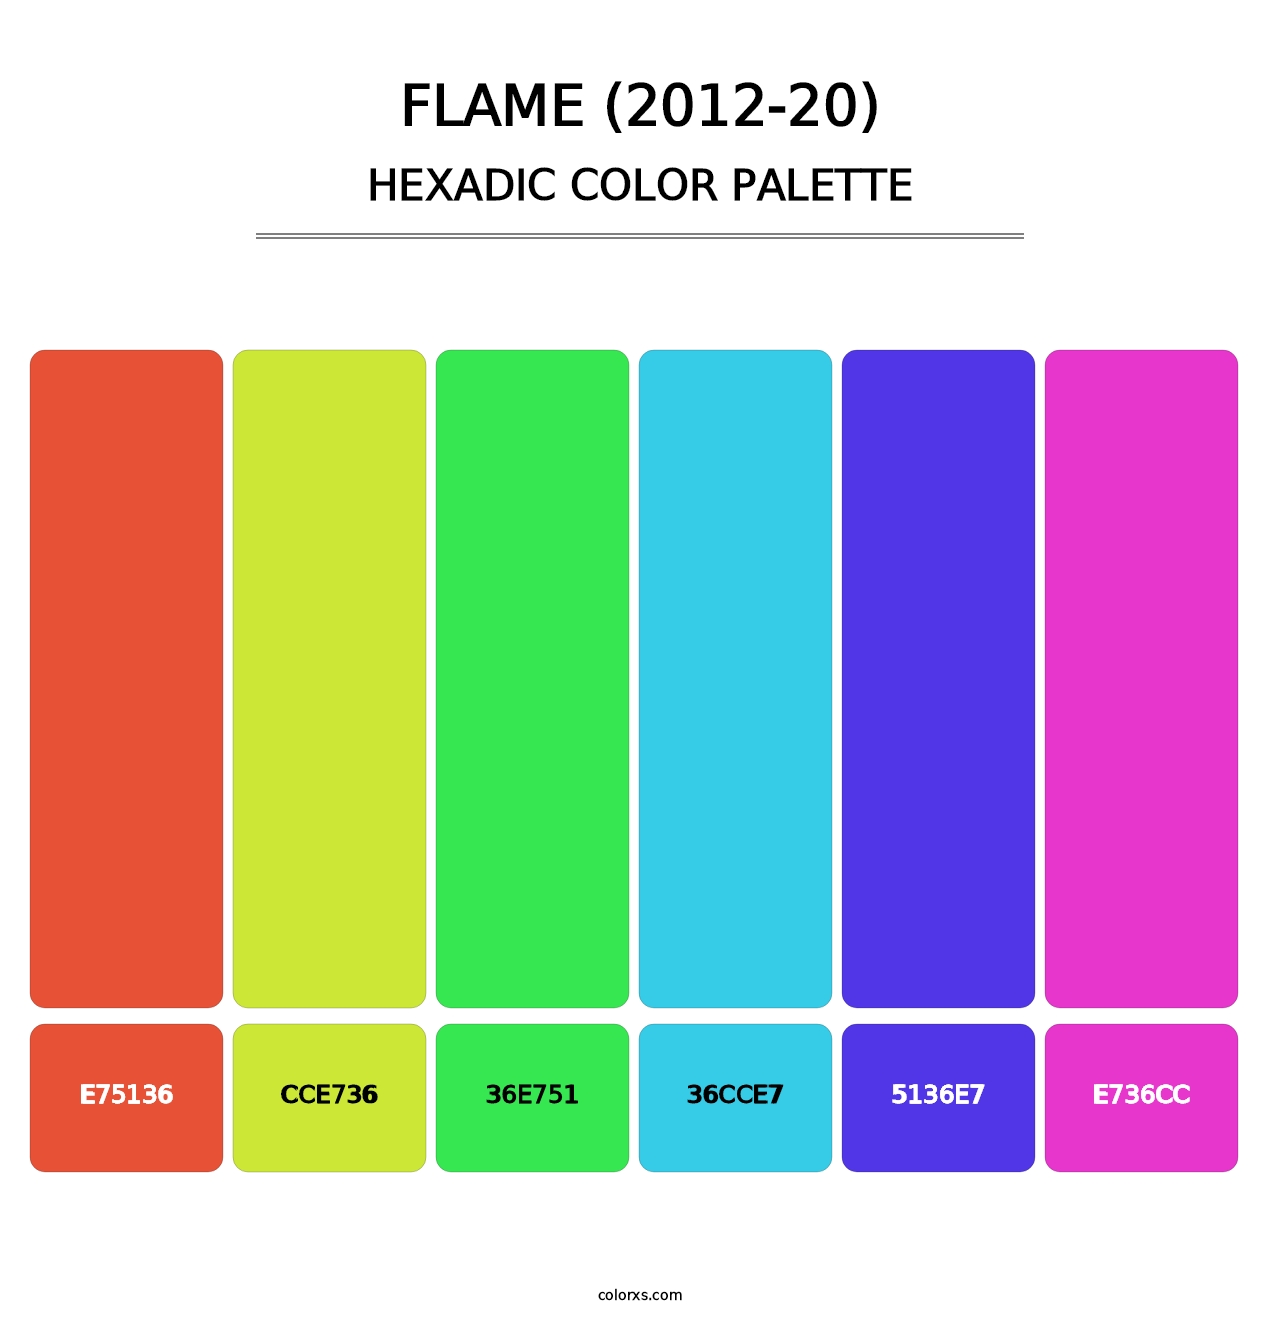 Flame (2012-20) - Hexadic Color Palette